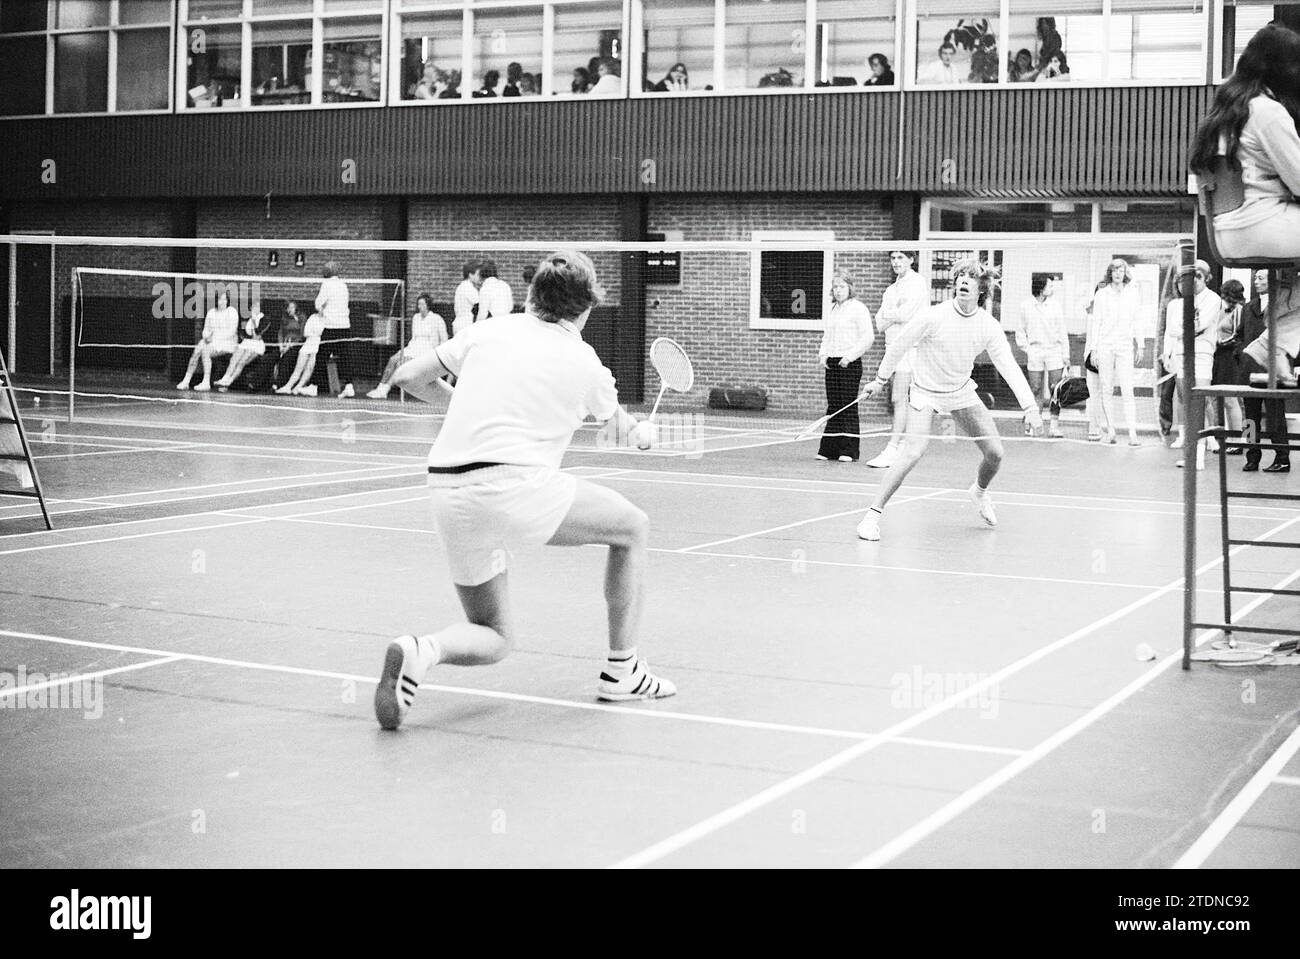 Badminton, Whizgle News from the Past, Tailored for the Future. Explore historical narratives, Dutch The Netherlands agency image with a modern perspective, bridging the gap between yesterday's events and tomorrow's insights. A timeless journey shaping the stories that shape our future Stock Photo